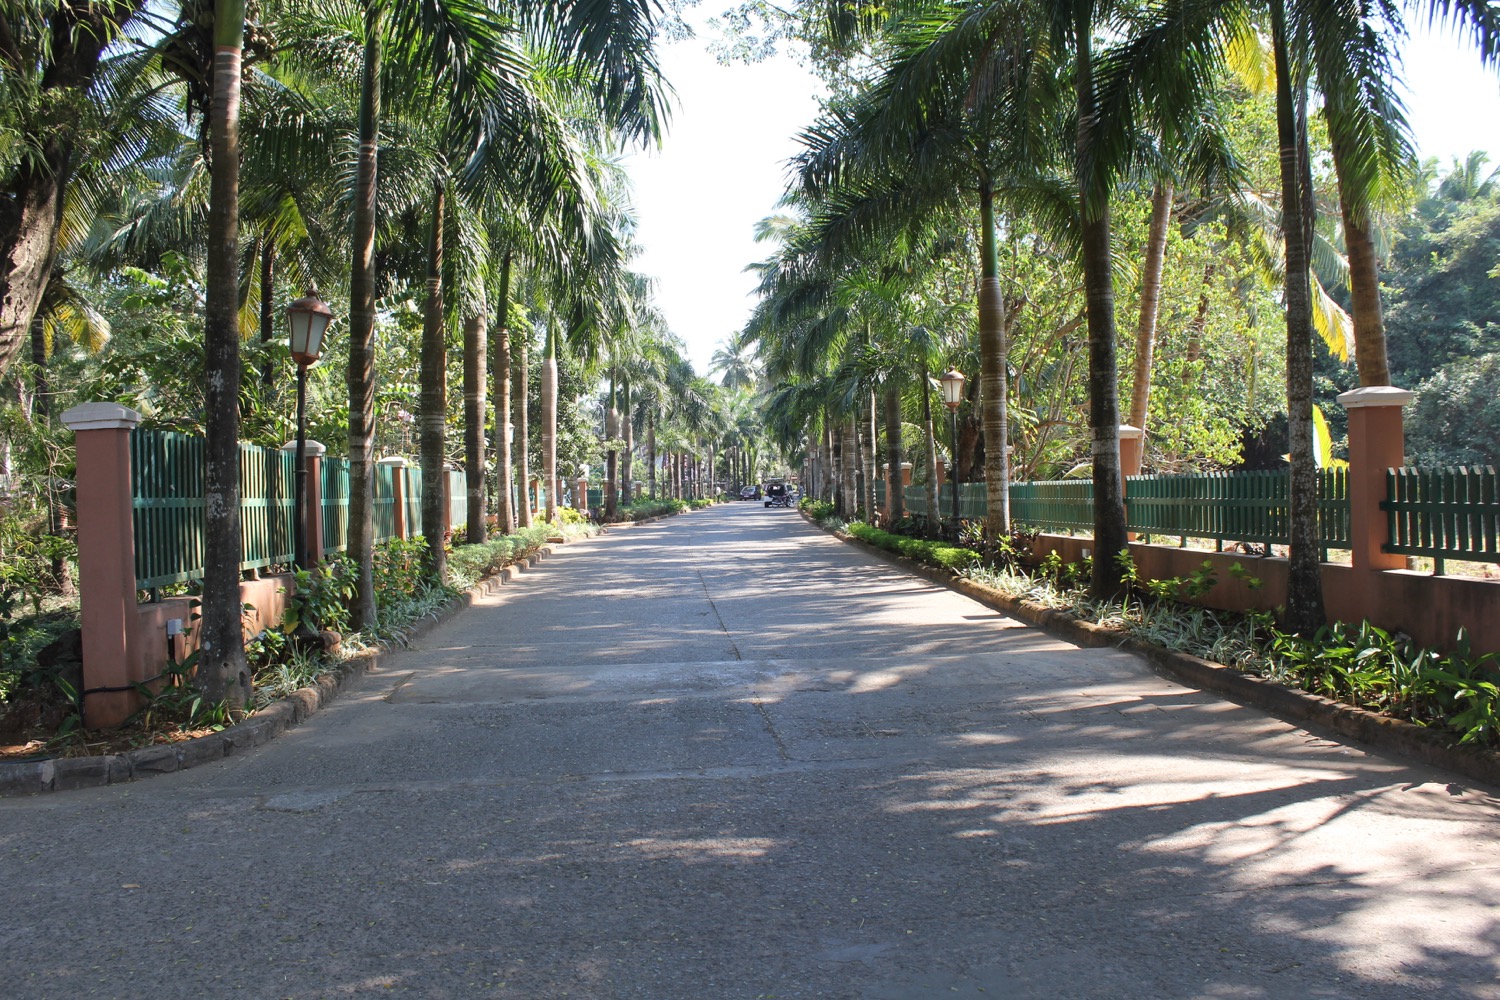 a road with palm trees and a fence